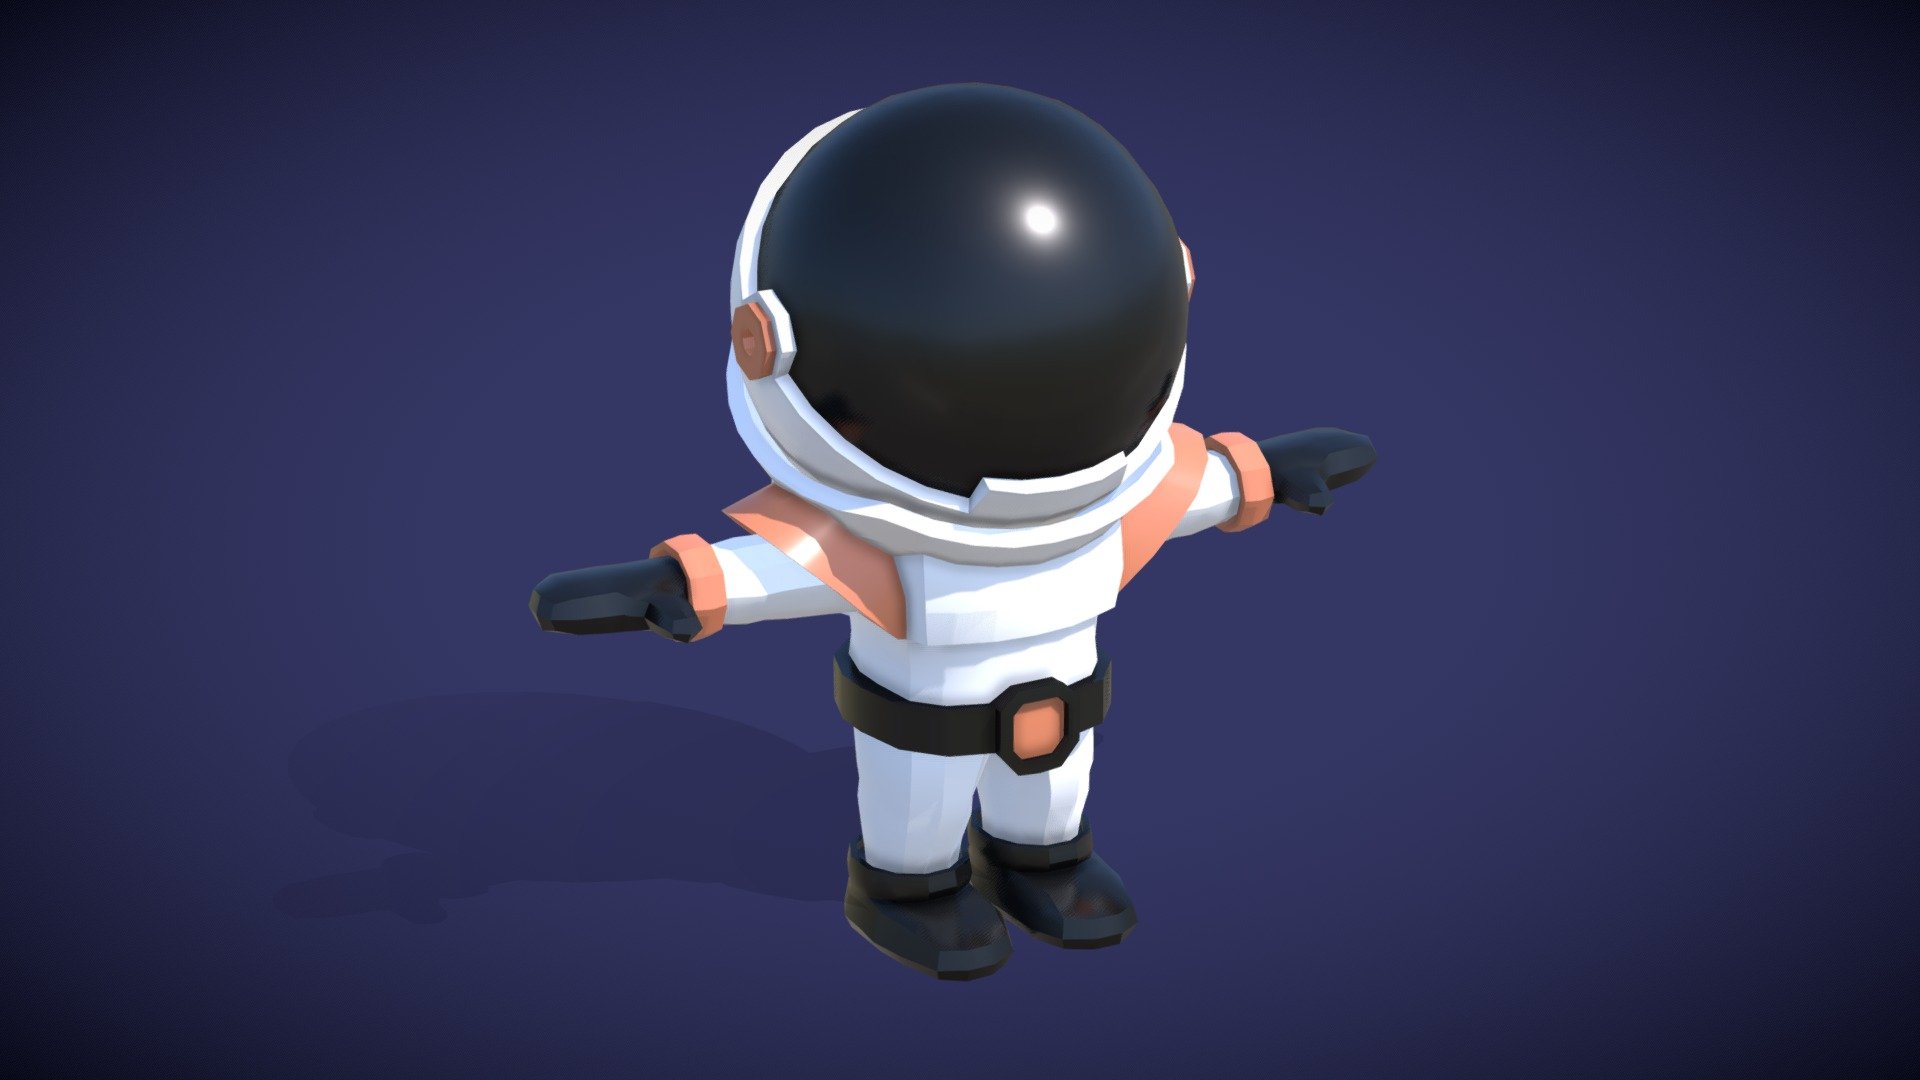 Spaceman Apk Download for Android- Latest version 2.1-  com.crystallizeapps.spaceman